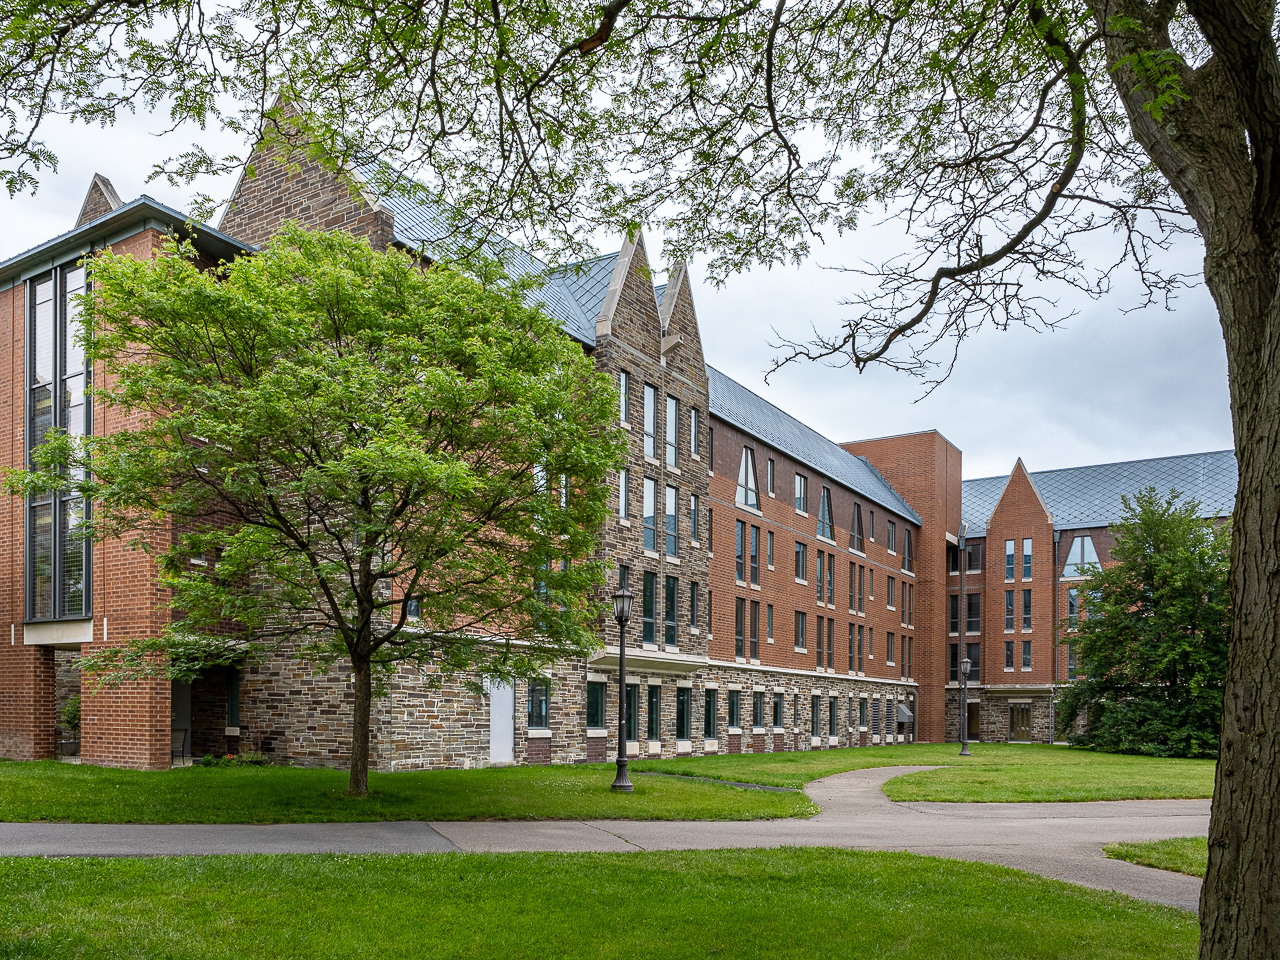 Court-Kay-Bauer Hall with brick and stone accents